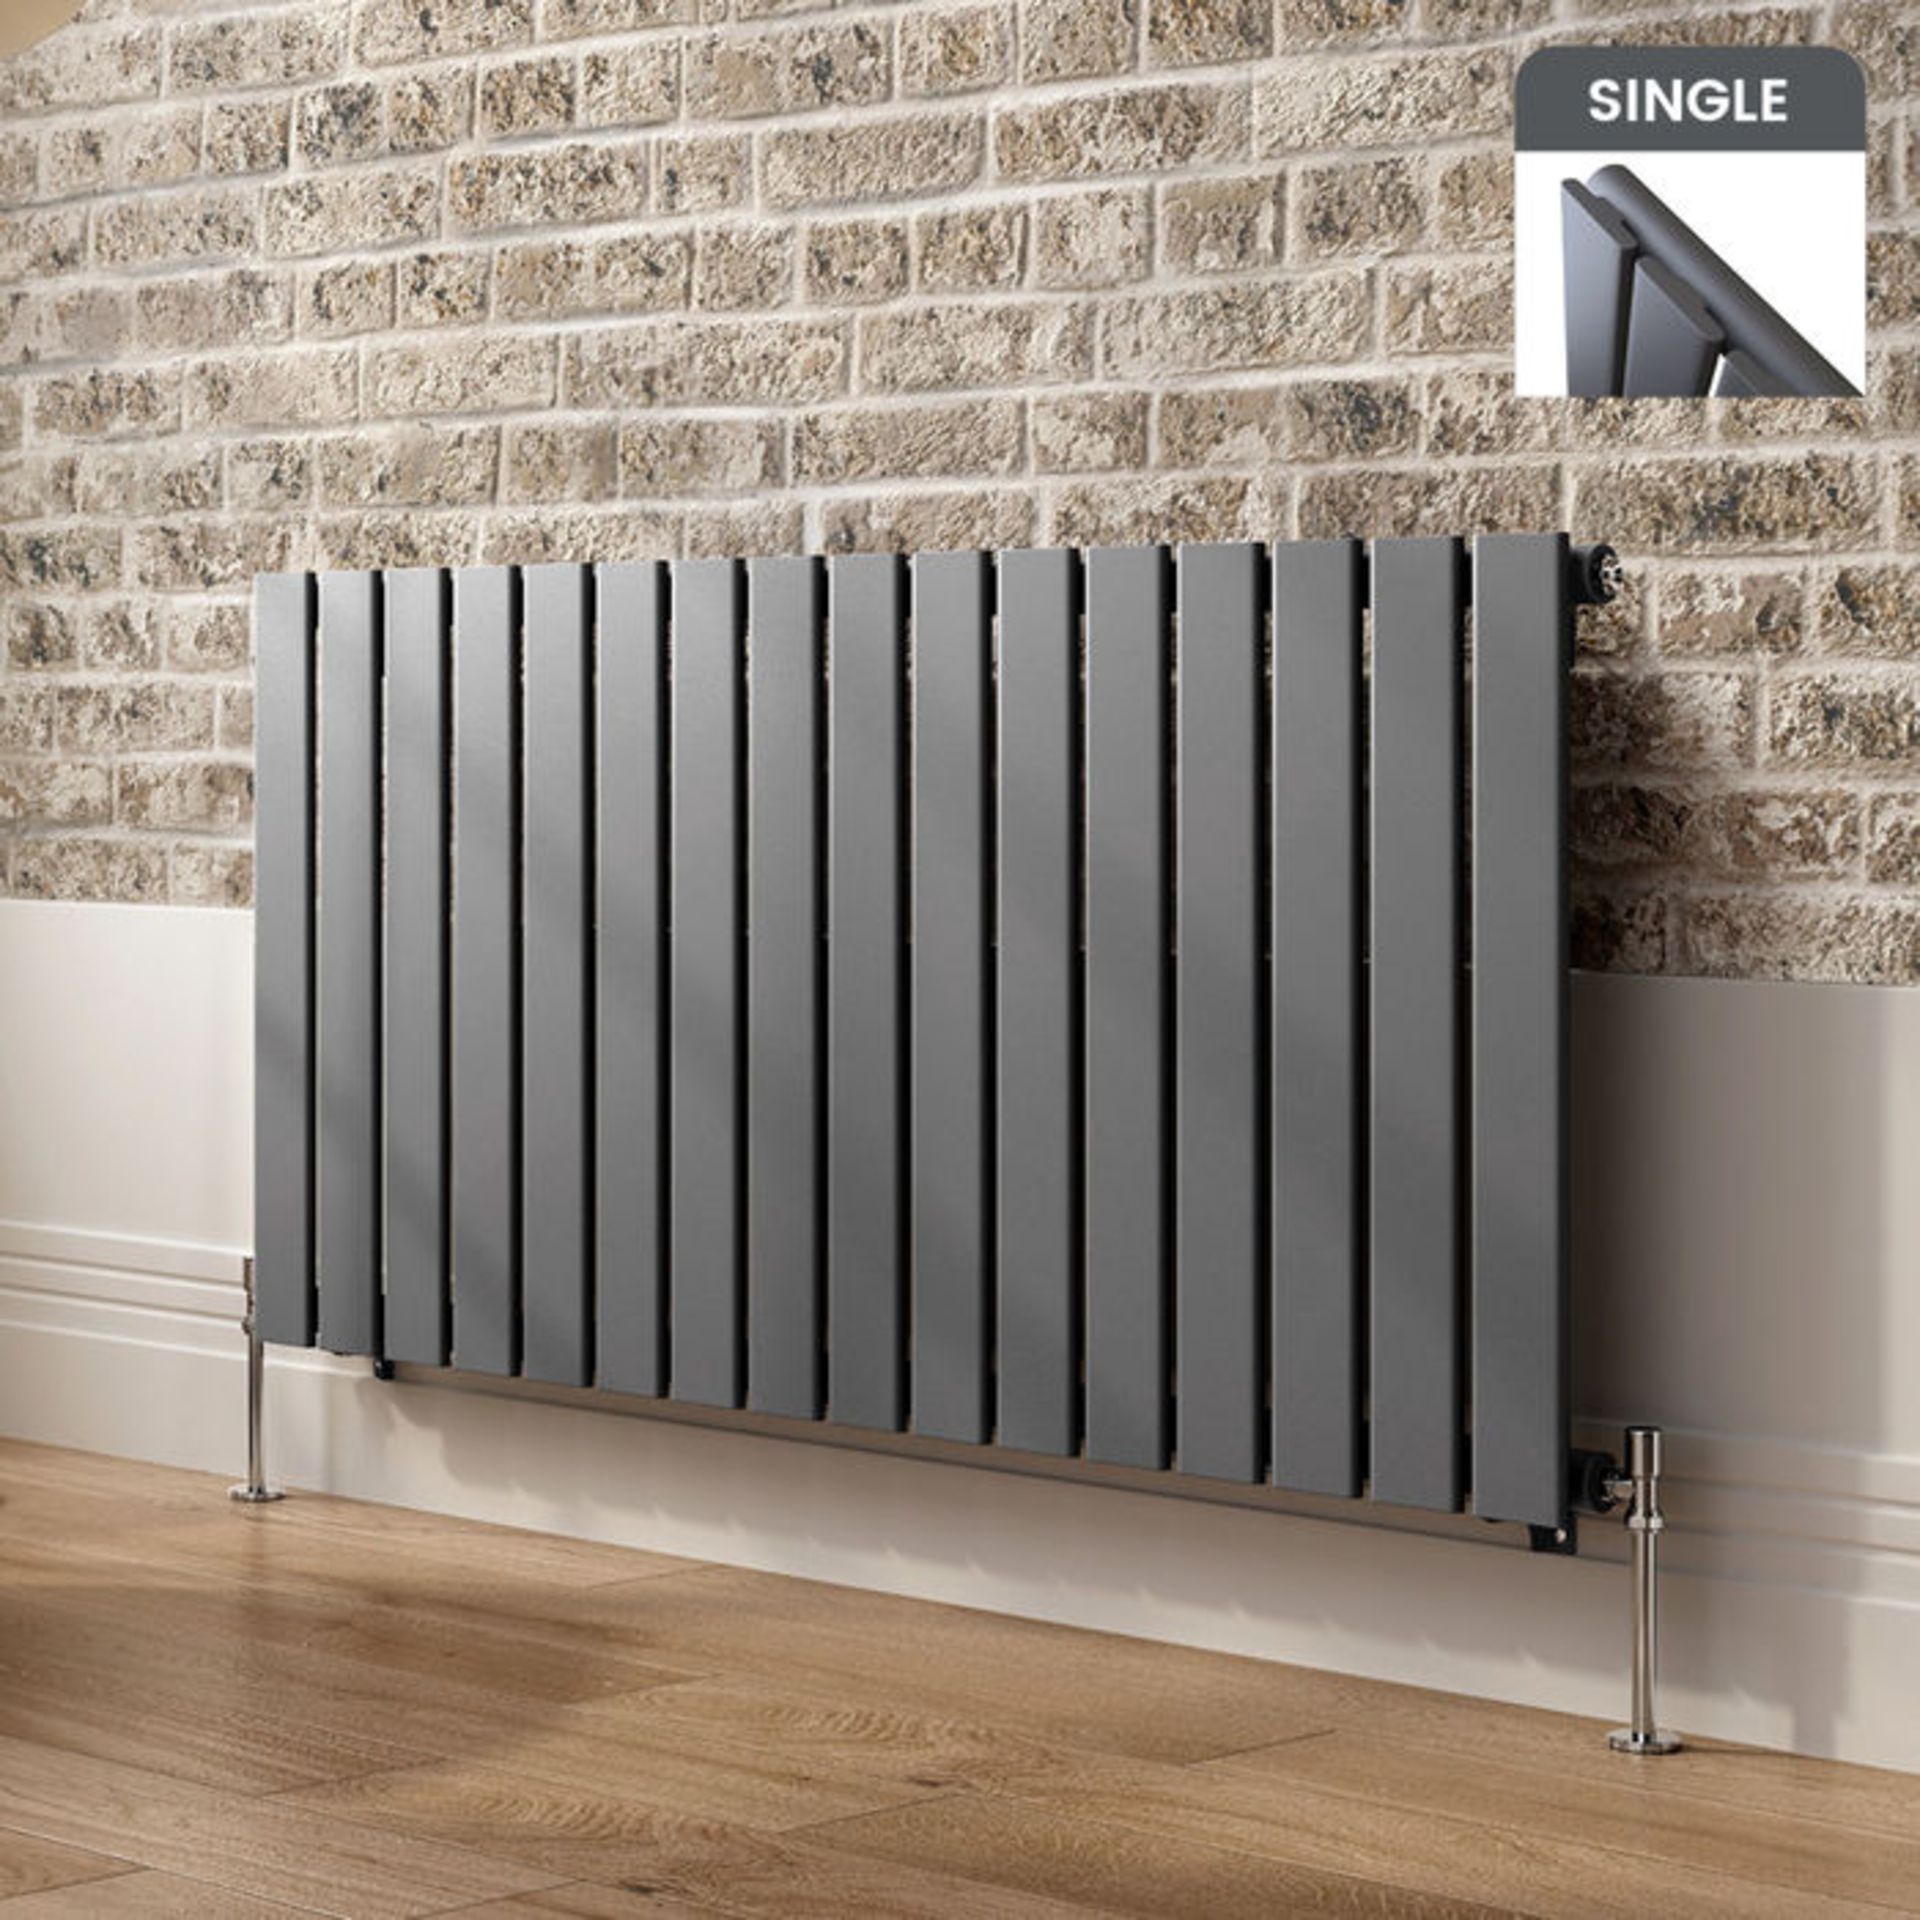 (AL213) 600x1212mm Anthracite Single Flat Panel Horizontal Radiator. Made from high grade low carbon